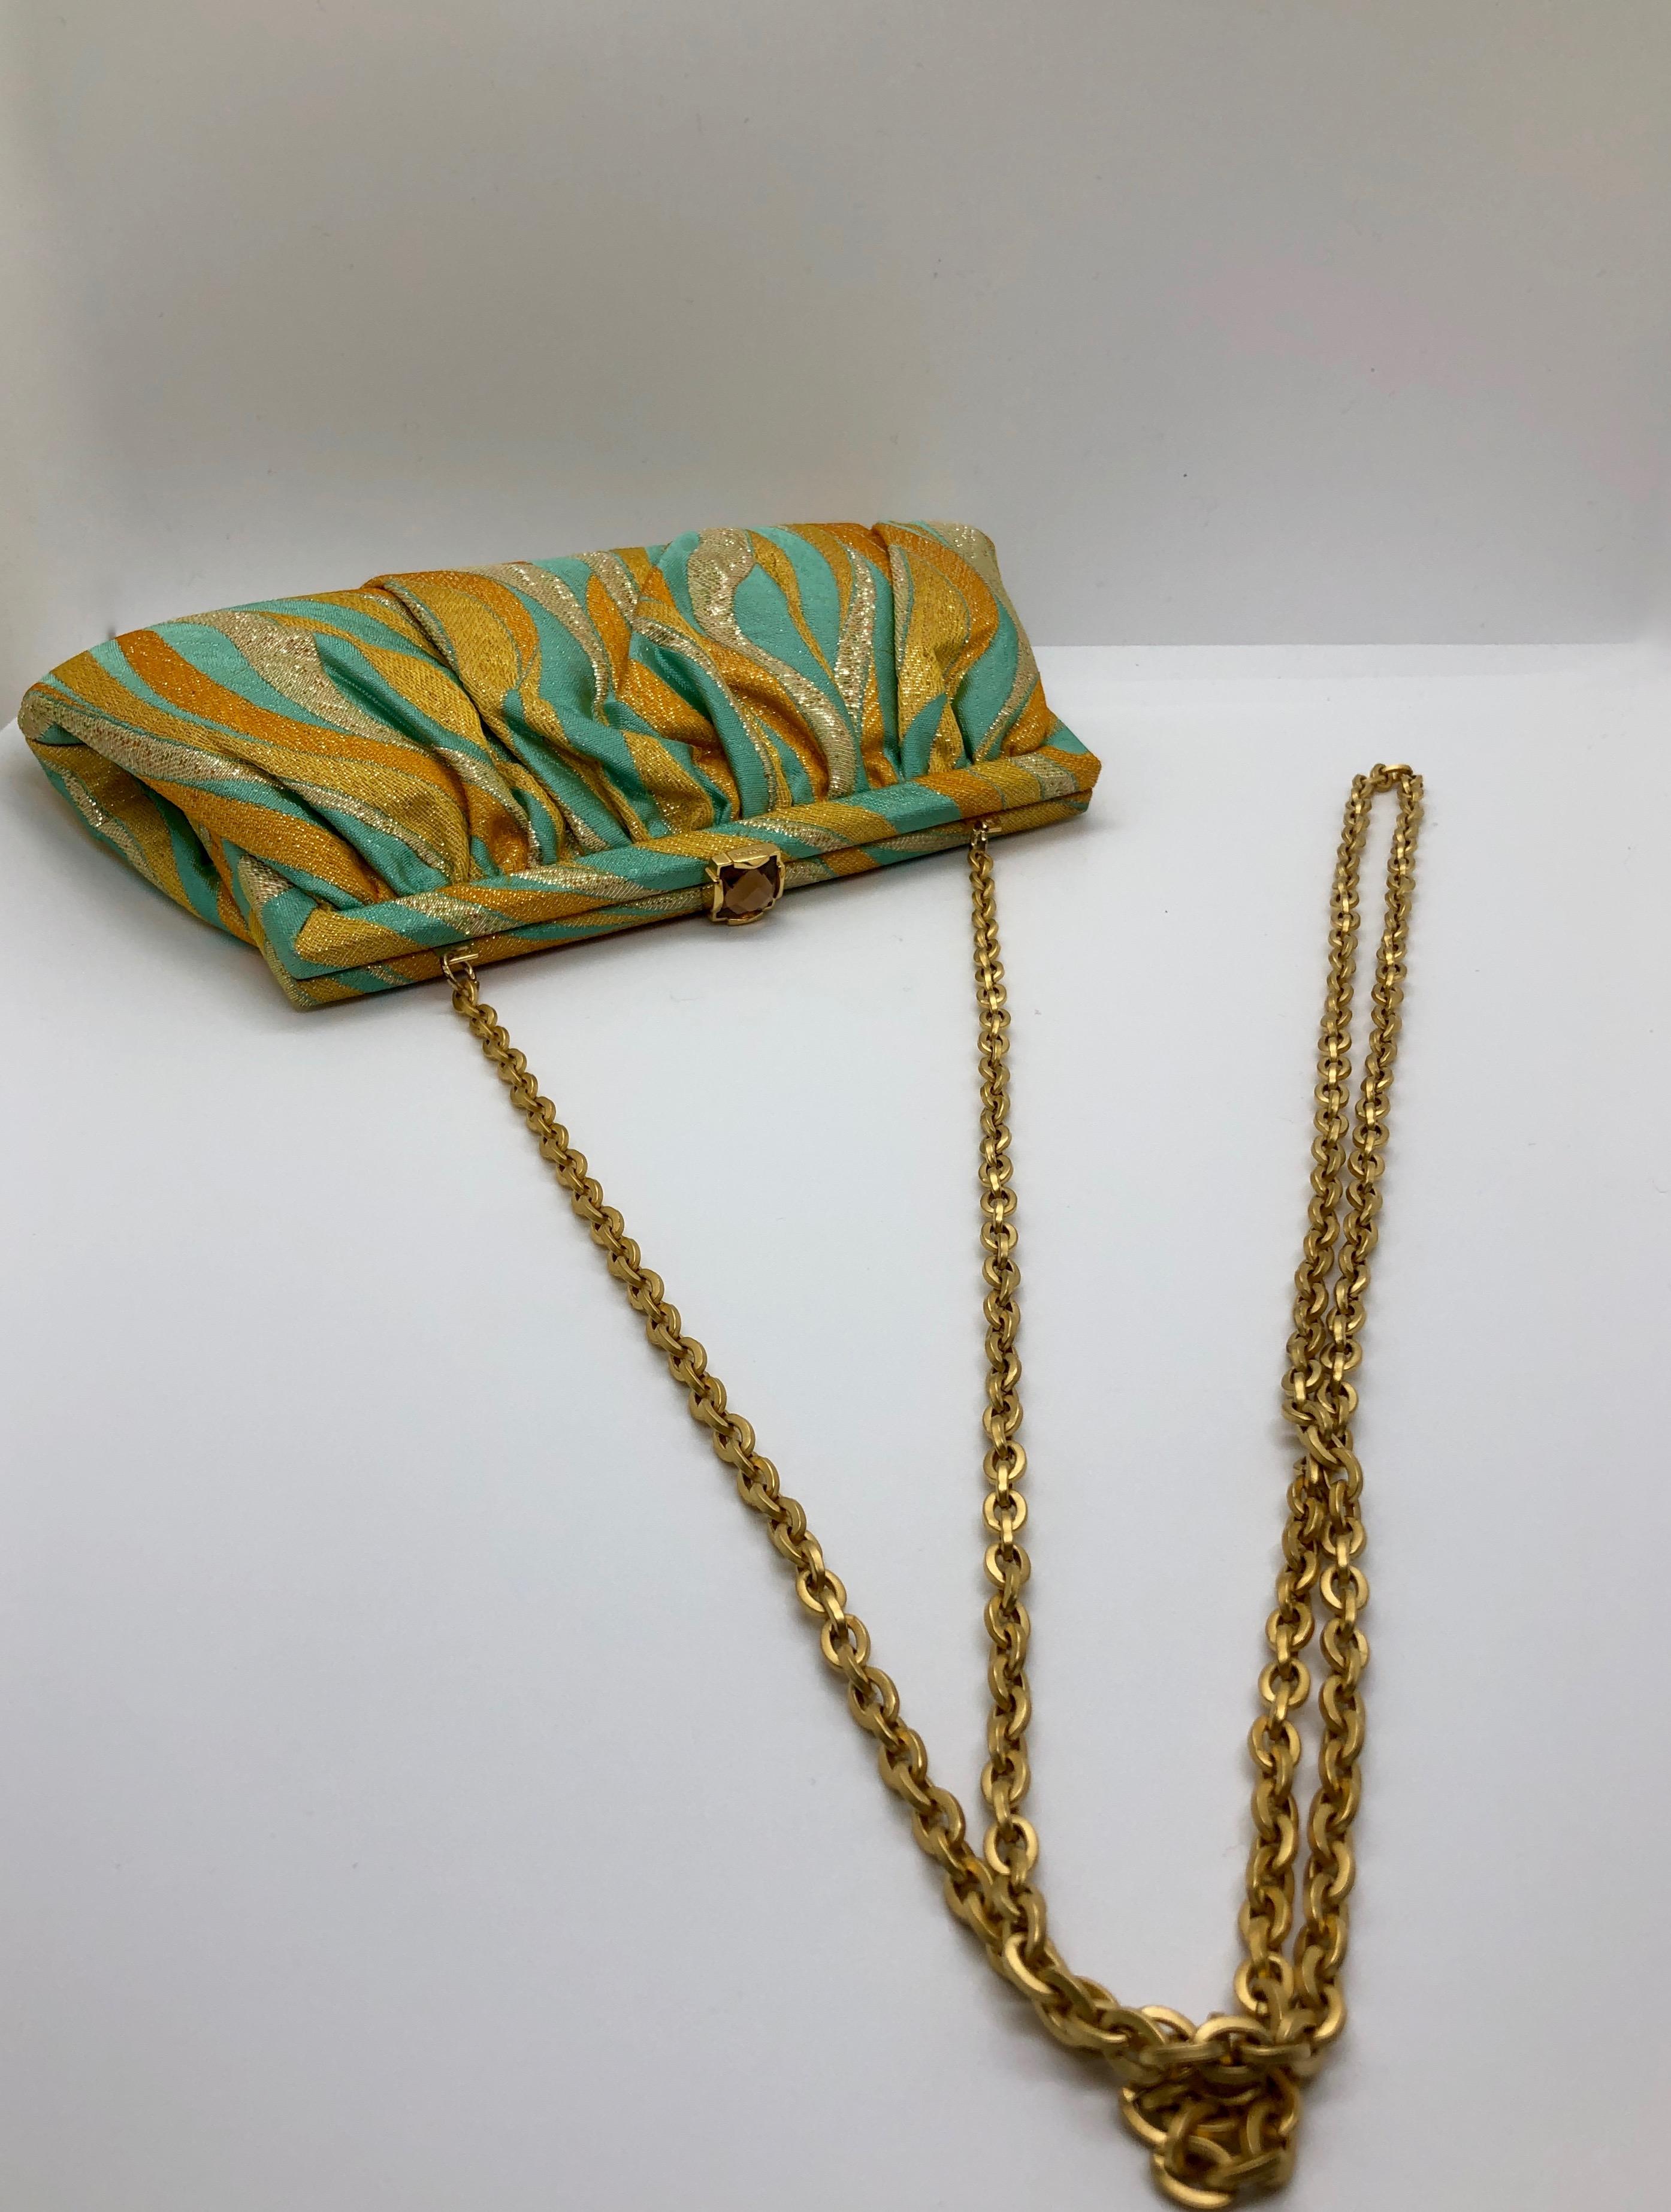 Kotur Metallic Yellow, Gold & Turquoise Silk w/ Gold Clasp & Chain Evening Bag For Sale 2